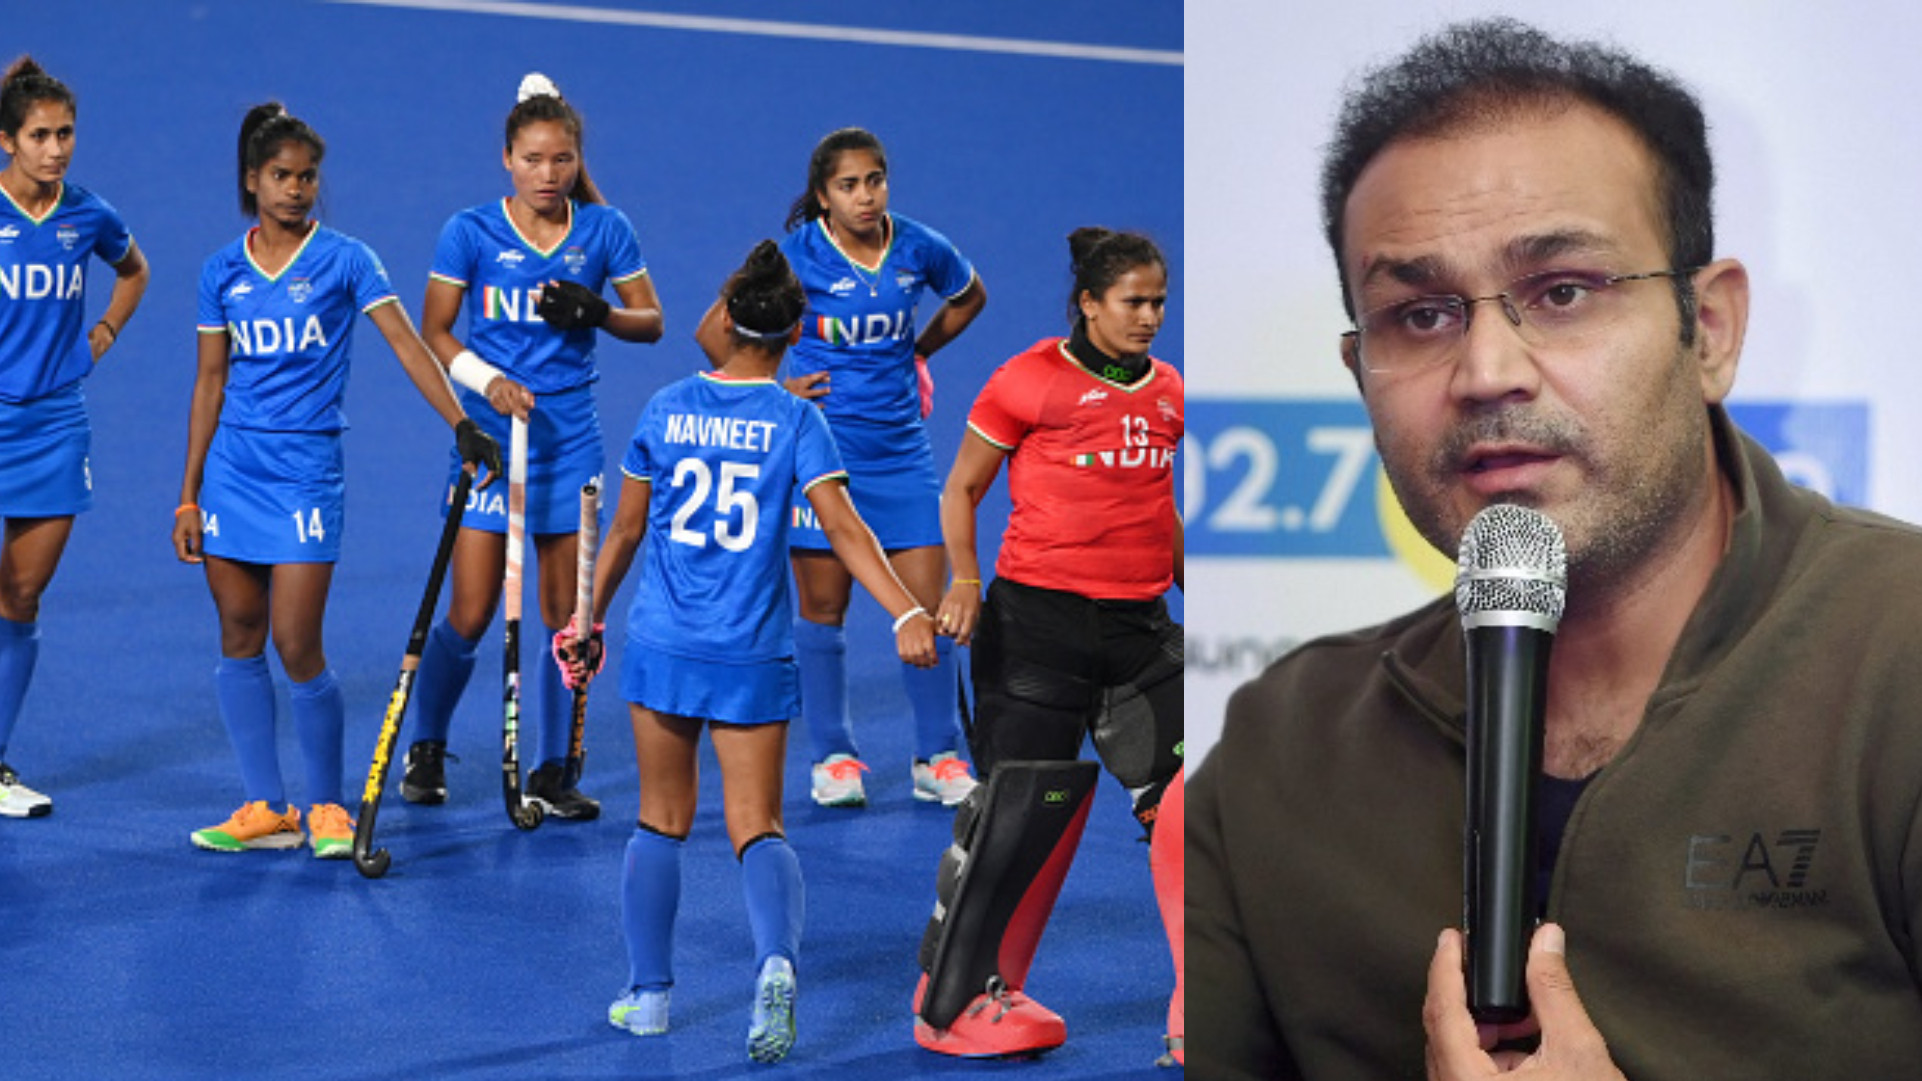 CWG 2022: “Such biases happened in cricket as well” - Sehwag reacts to India women’s hockey semi-final controversy